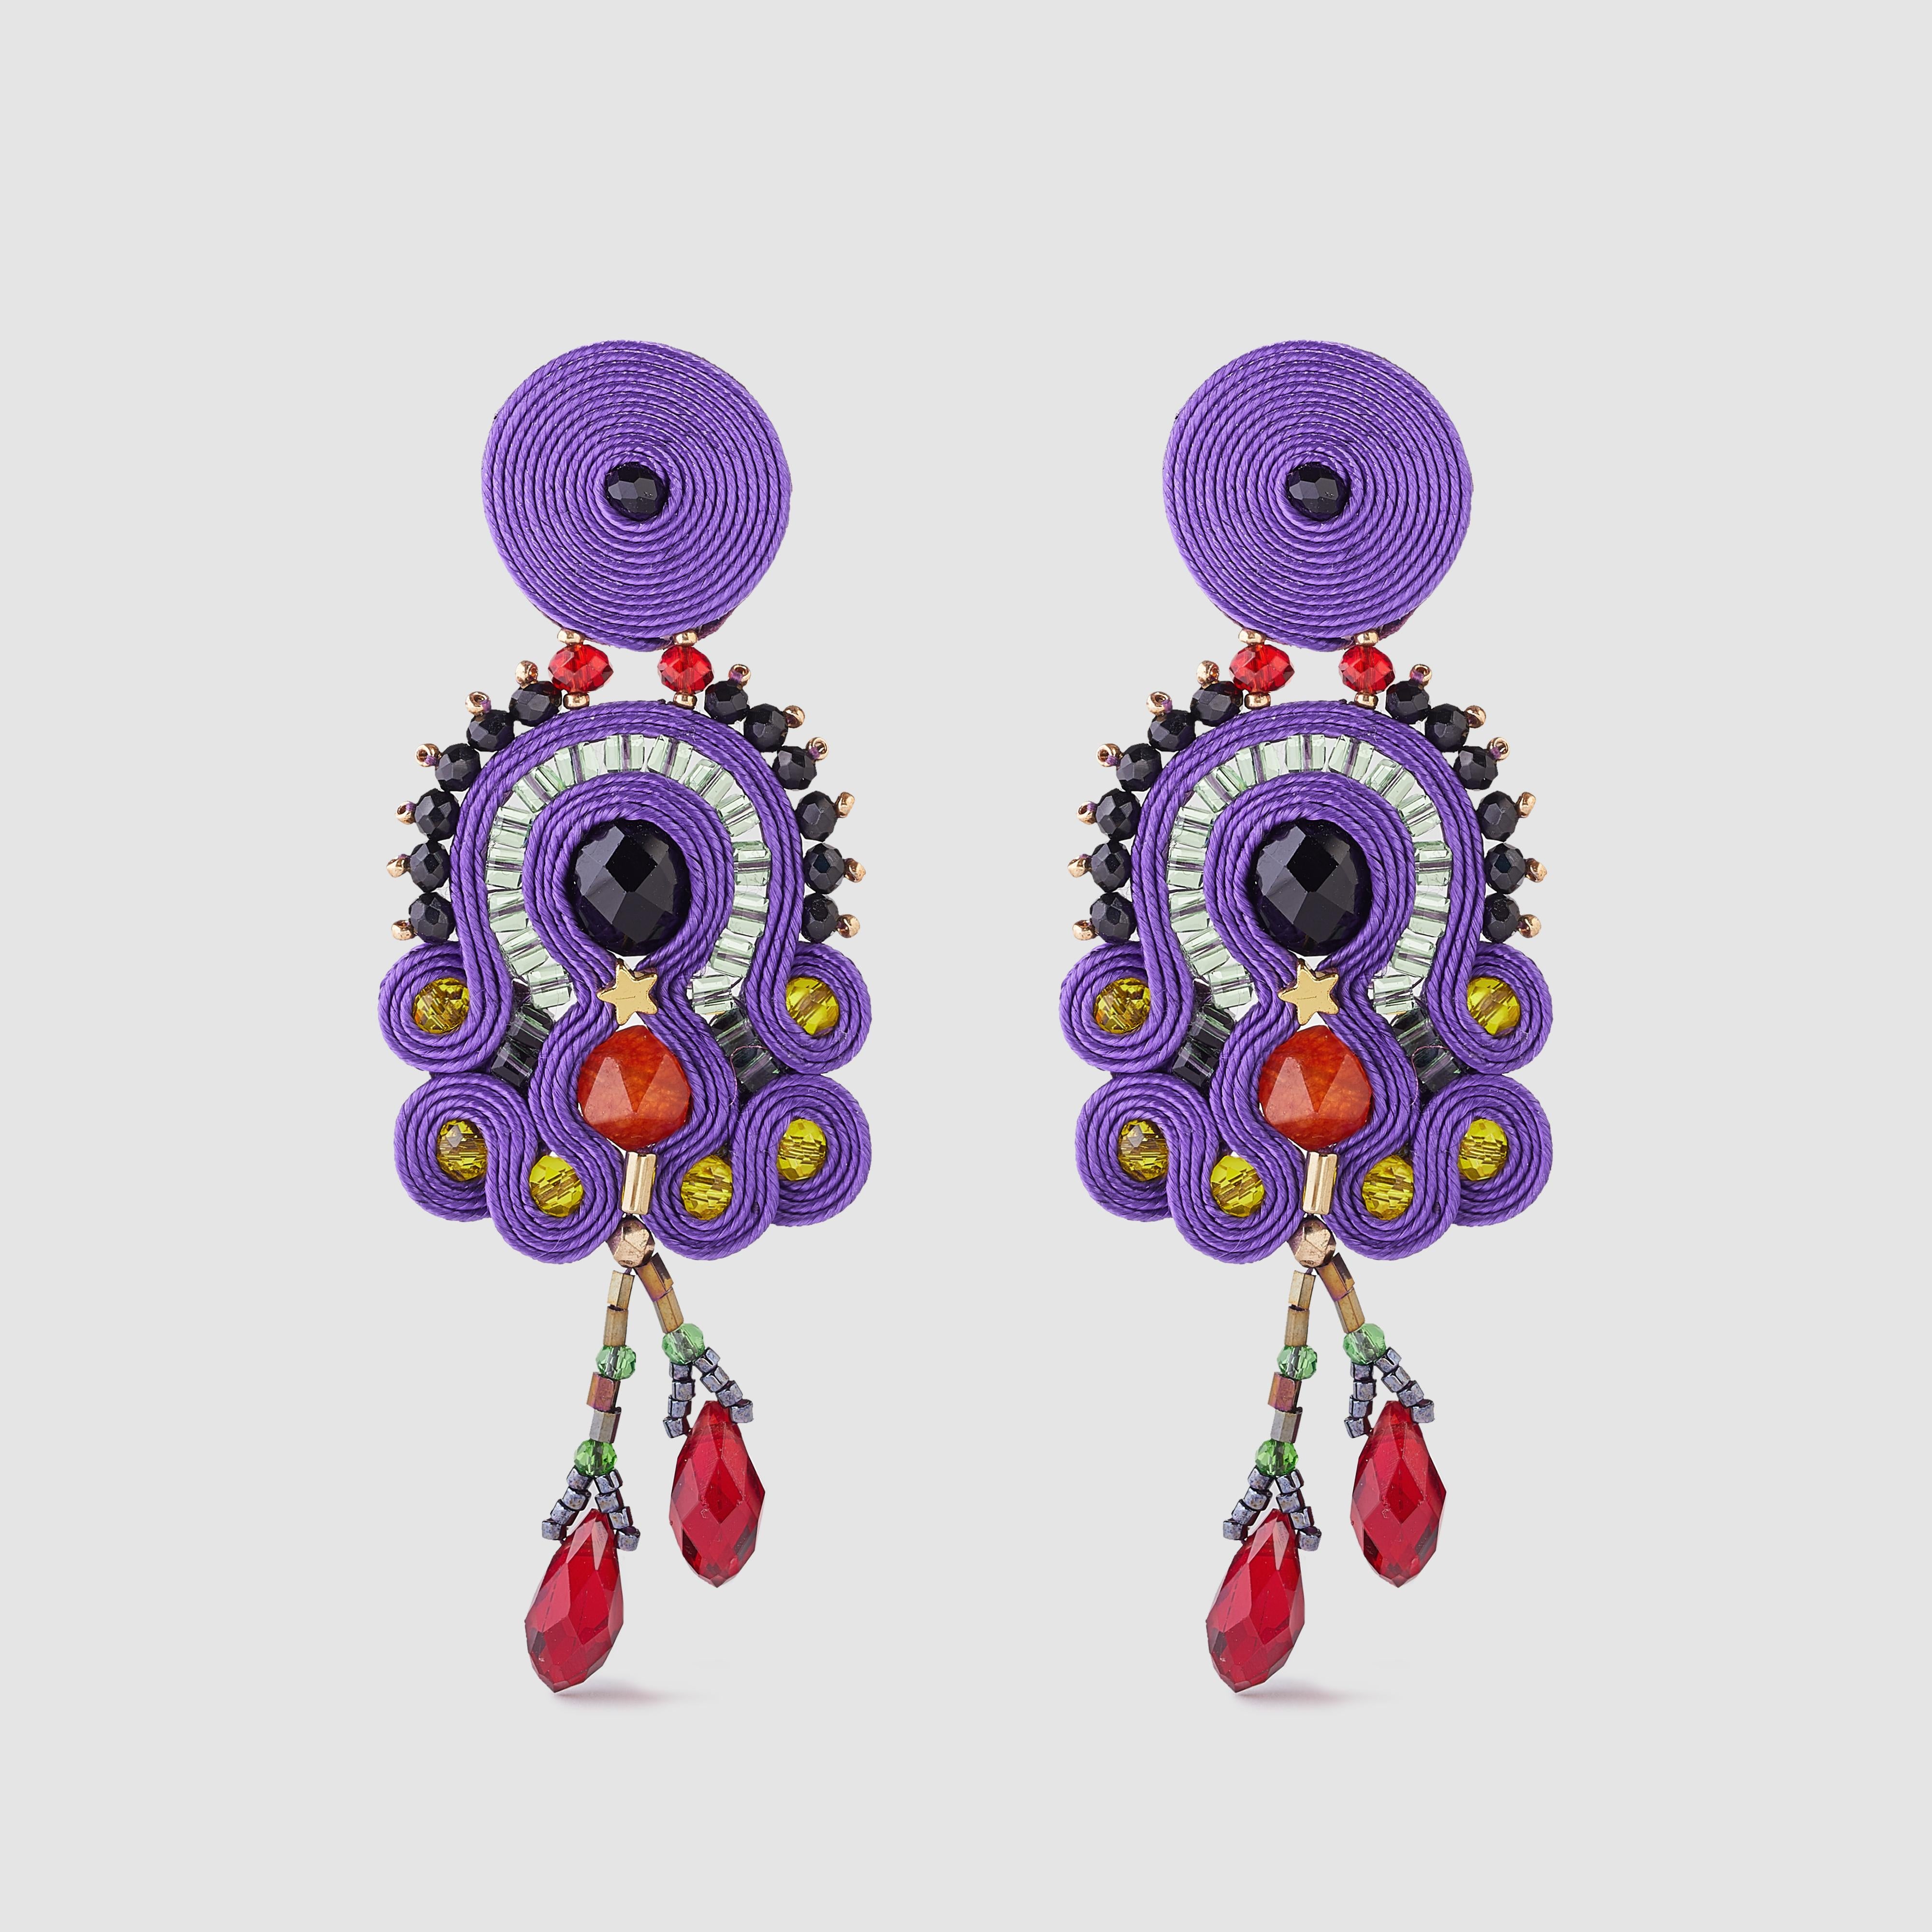 Musula Personalissima Nicoletta Night Soutache Earrings
Soutache earrings made with silk rayon and crystal beads & silver closure

Hand-sewn earrings.
Rayon yarn 2mm.
Carnelian, hematite and glass beads.
Silver nut XL
Length 9cm 
Ultralight,